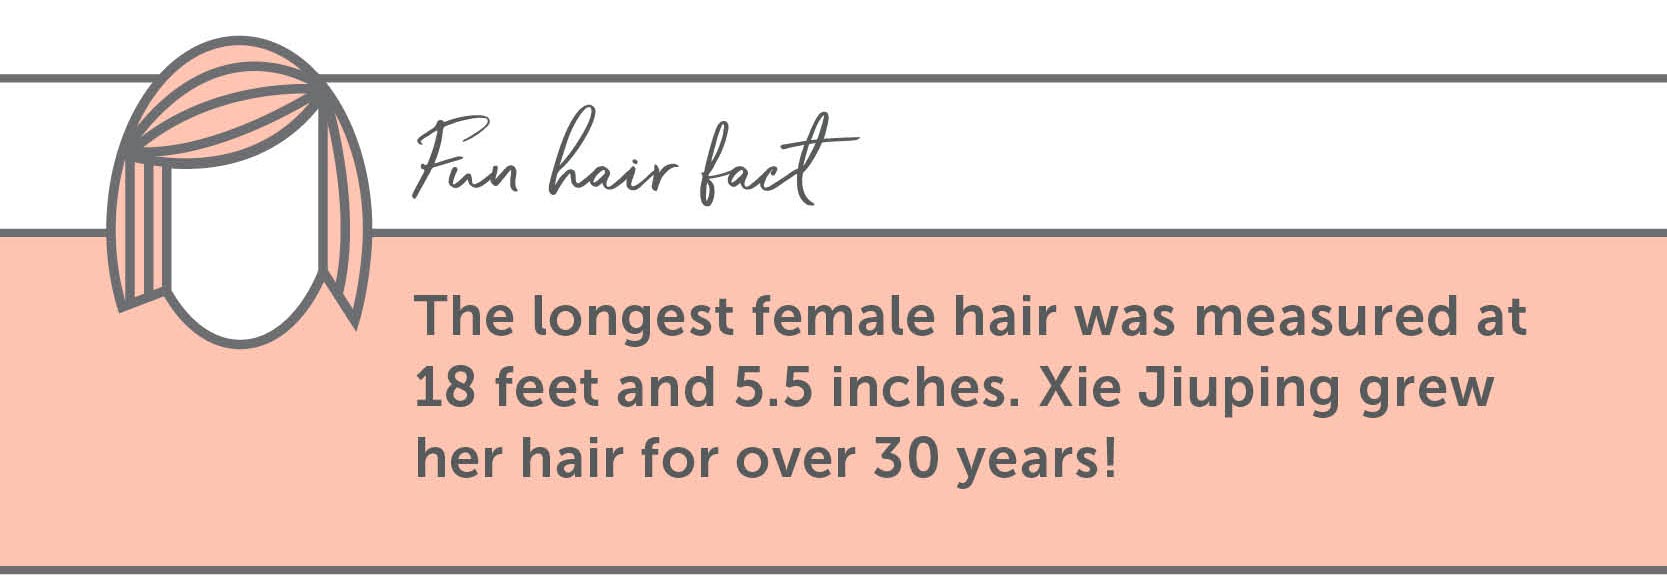 The longest female hair was measured at 18 feet and 5.5 inches. Xie Jiuping grew her hair for over 30 years!